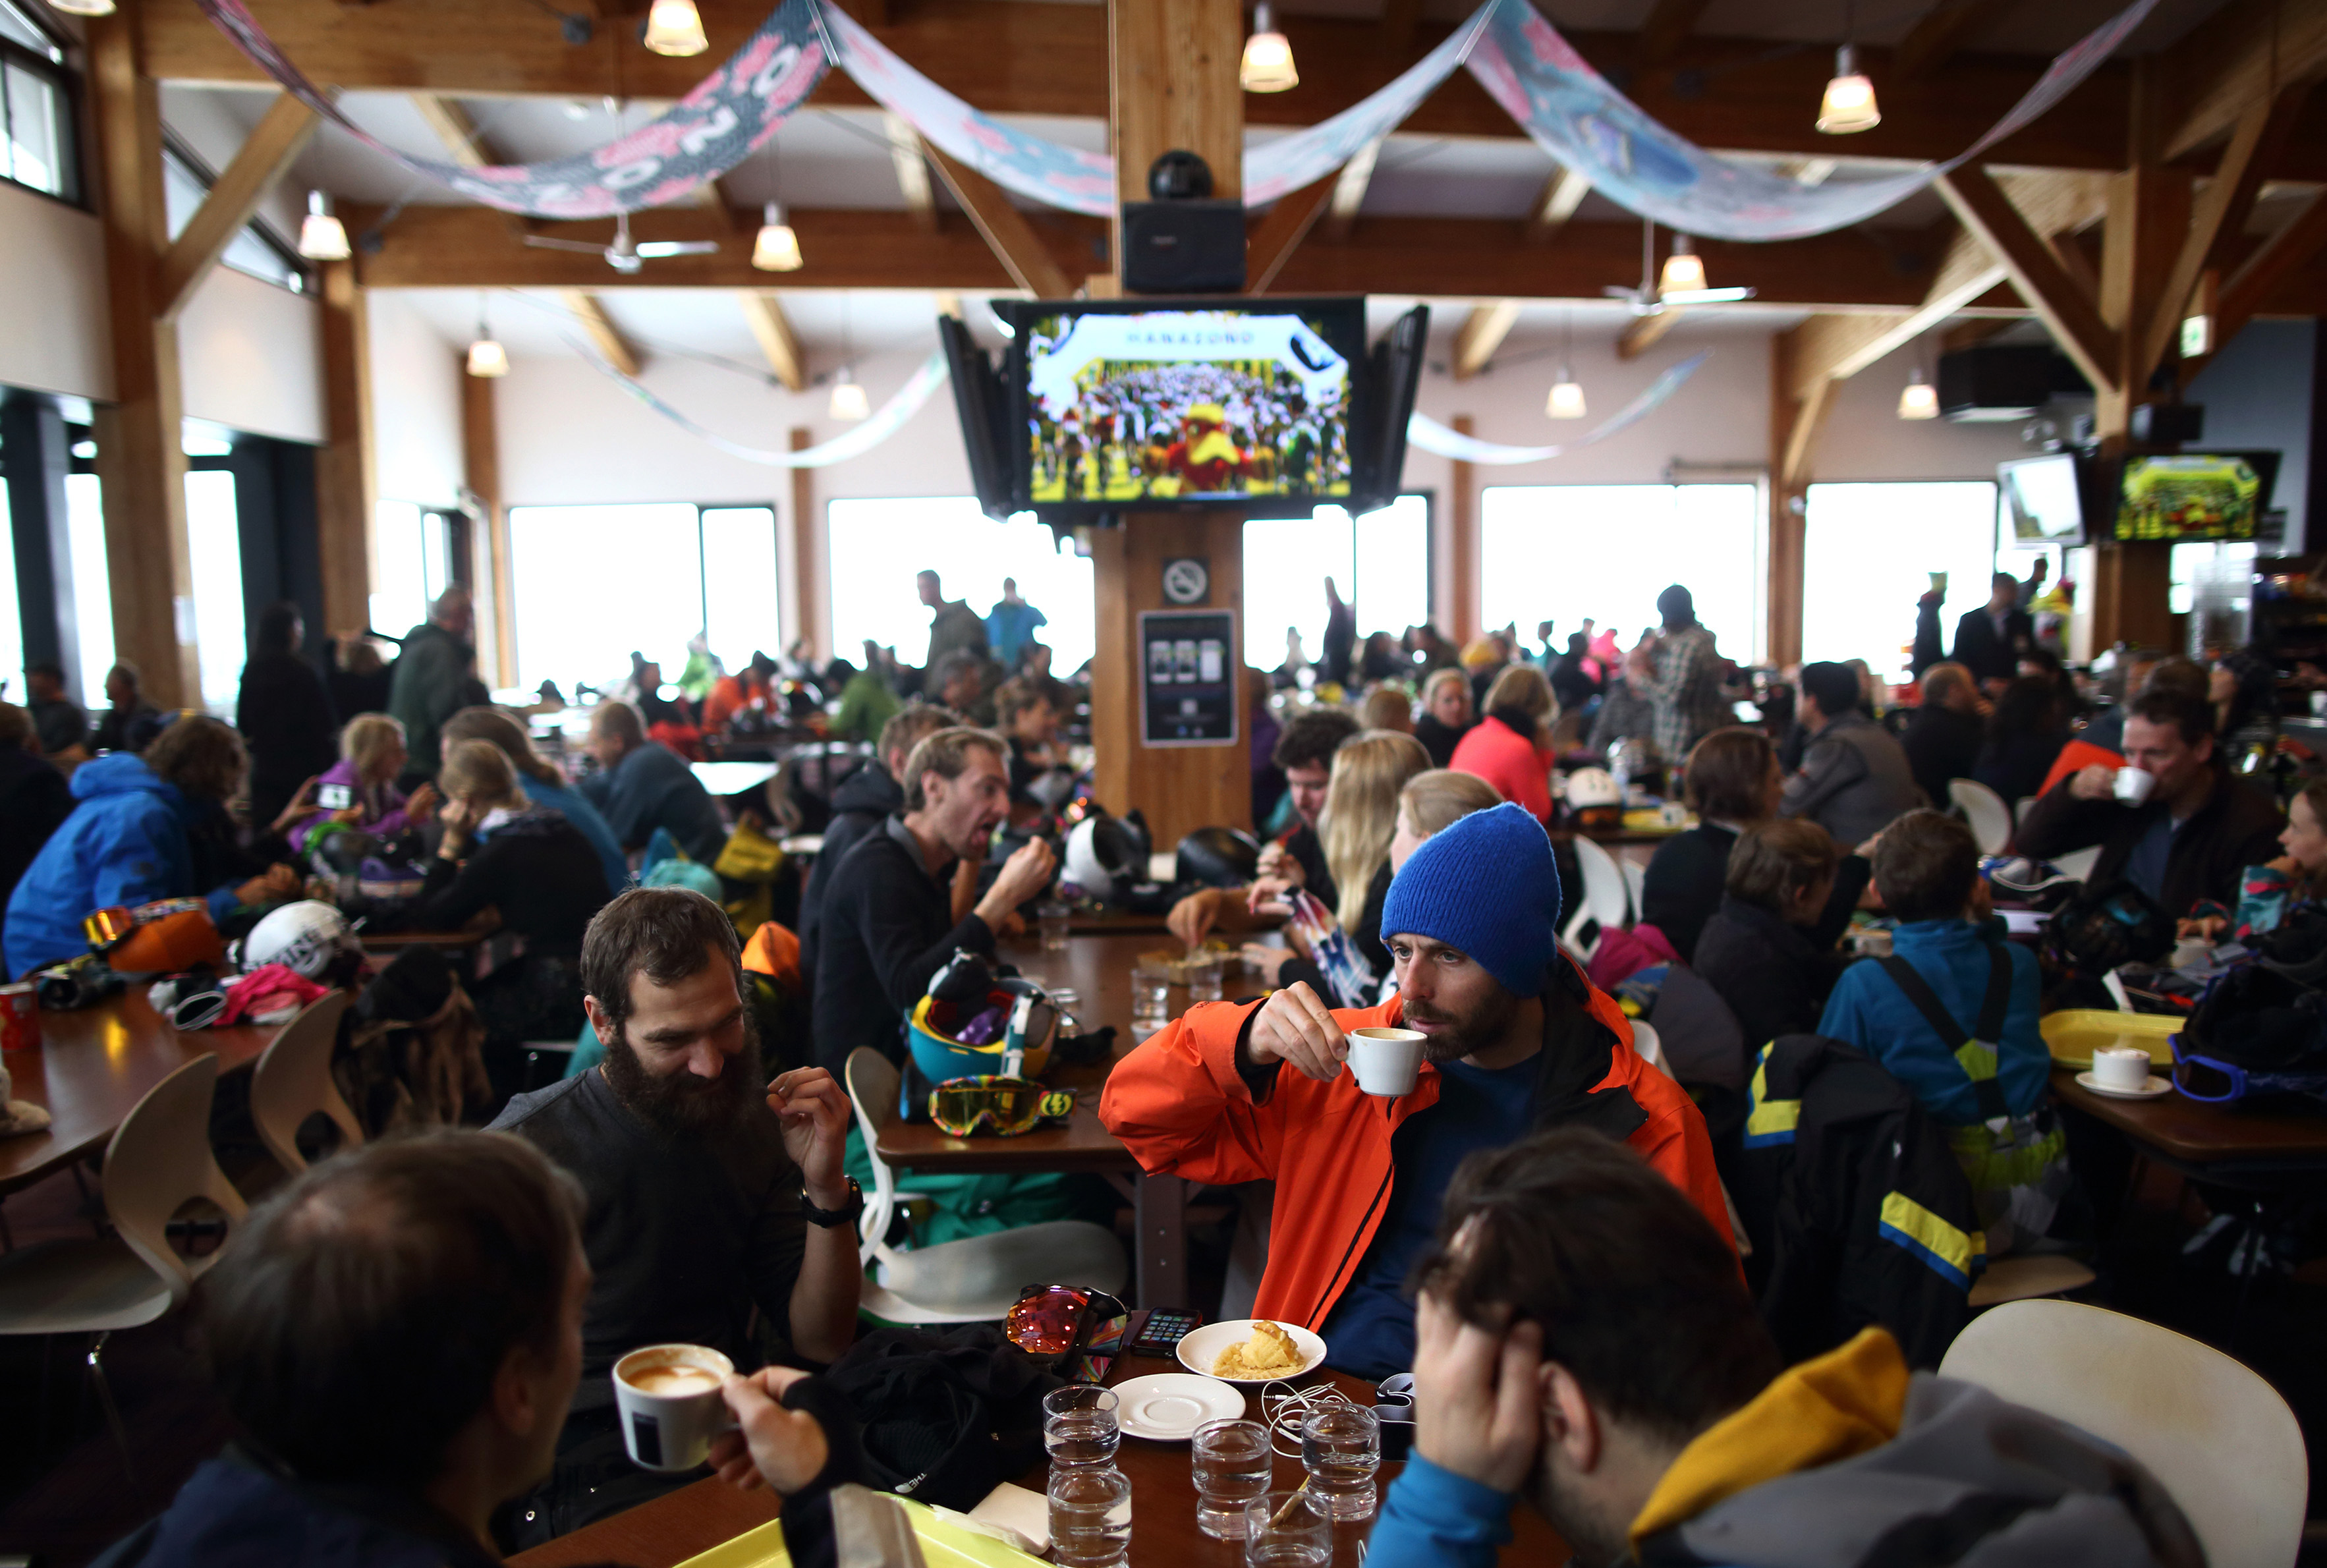 A cafeteria at the Niseko Hanazono resort in Kutchan, Hokkaido, is crowded with visitors in February 2015. Surging numbers of visitors and residents is helping the ski resort to flourish while other rural communities slowly die. | BLOOMBERG